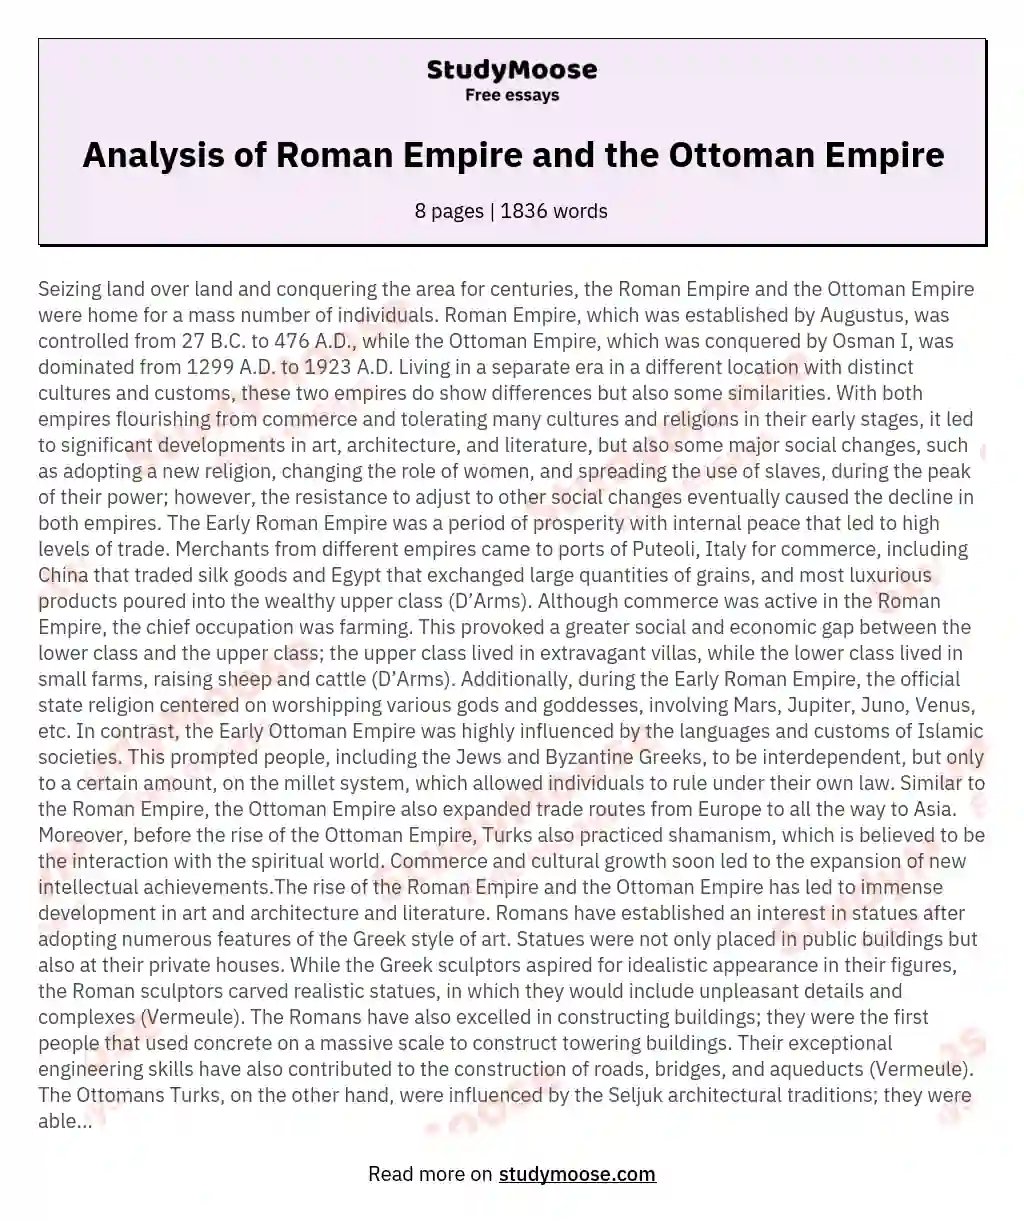 Analysis of Roman Empire and the Ottoman Empire essay